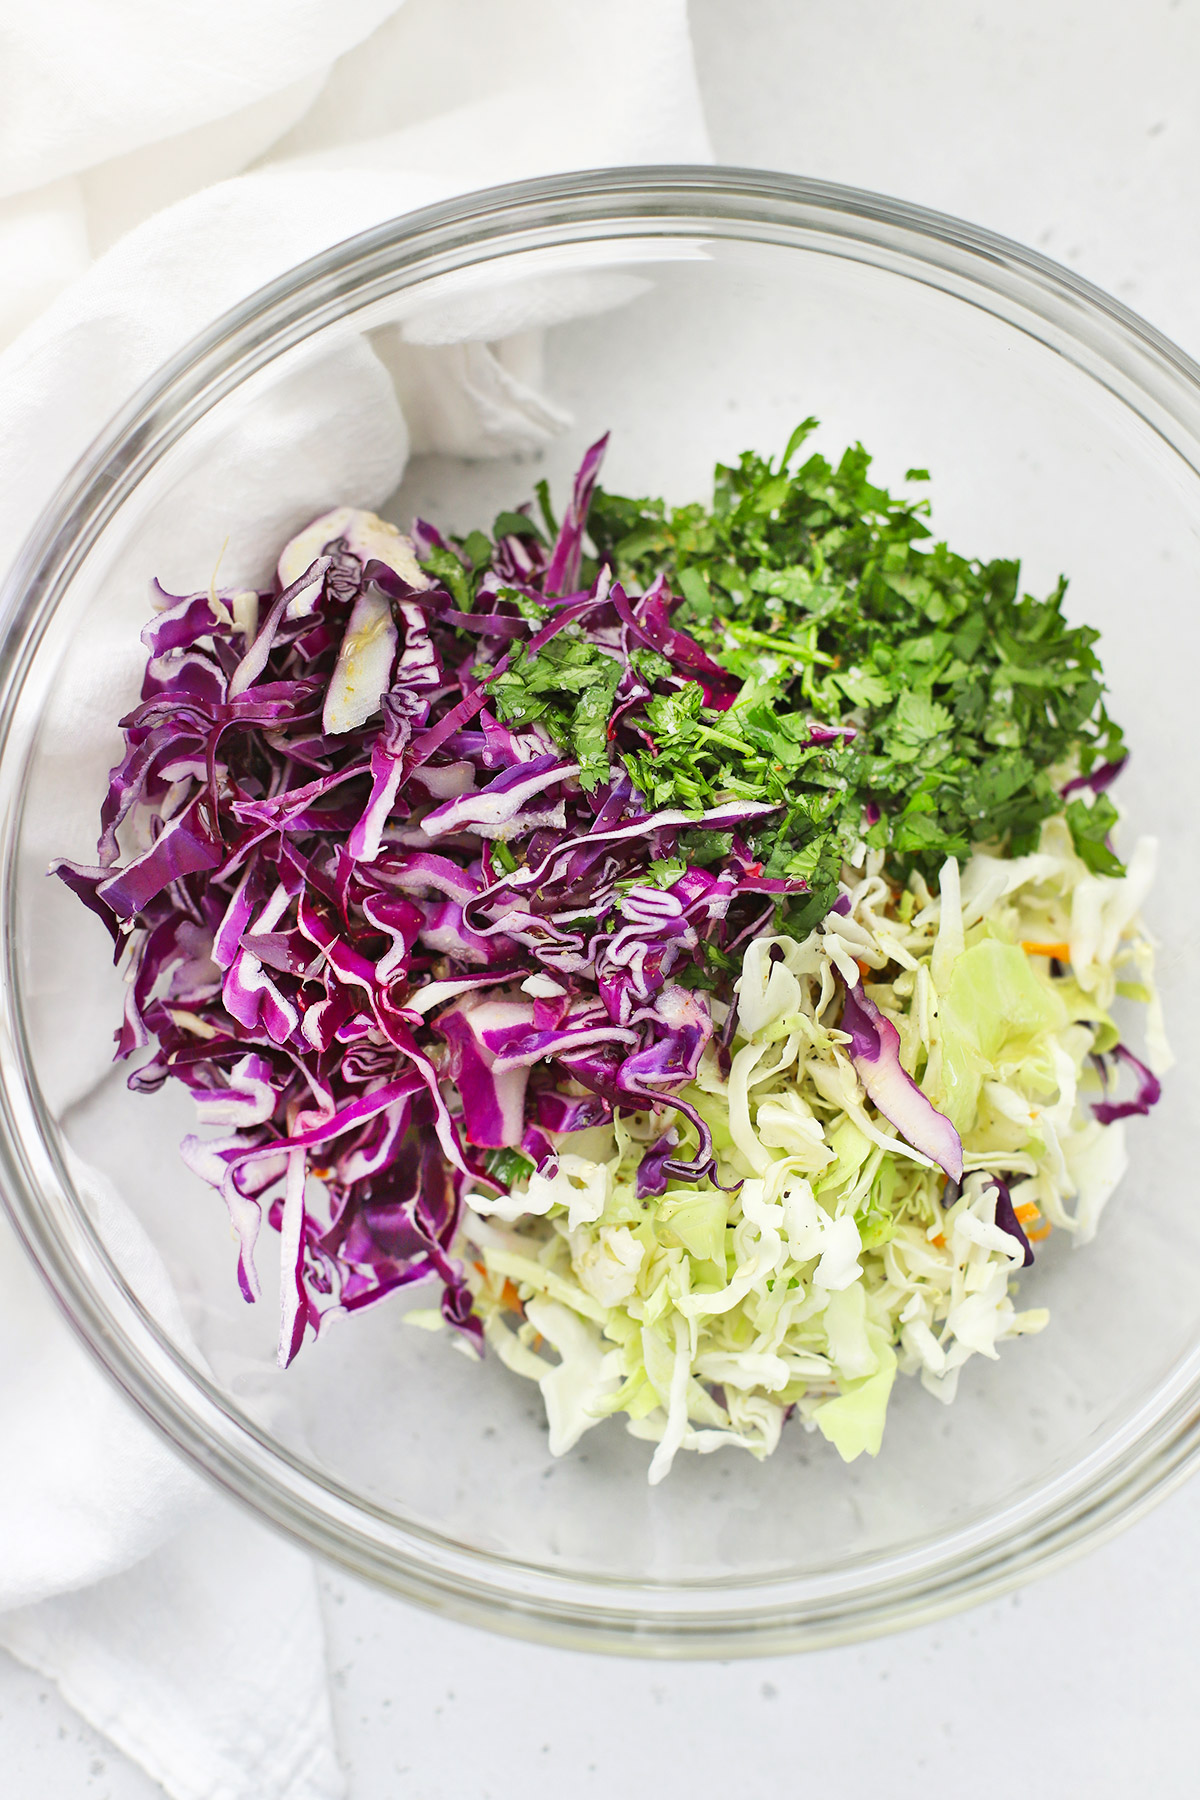 Ingredients for Cilantro Lime Slaw, ready to be mixed together